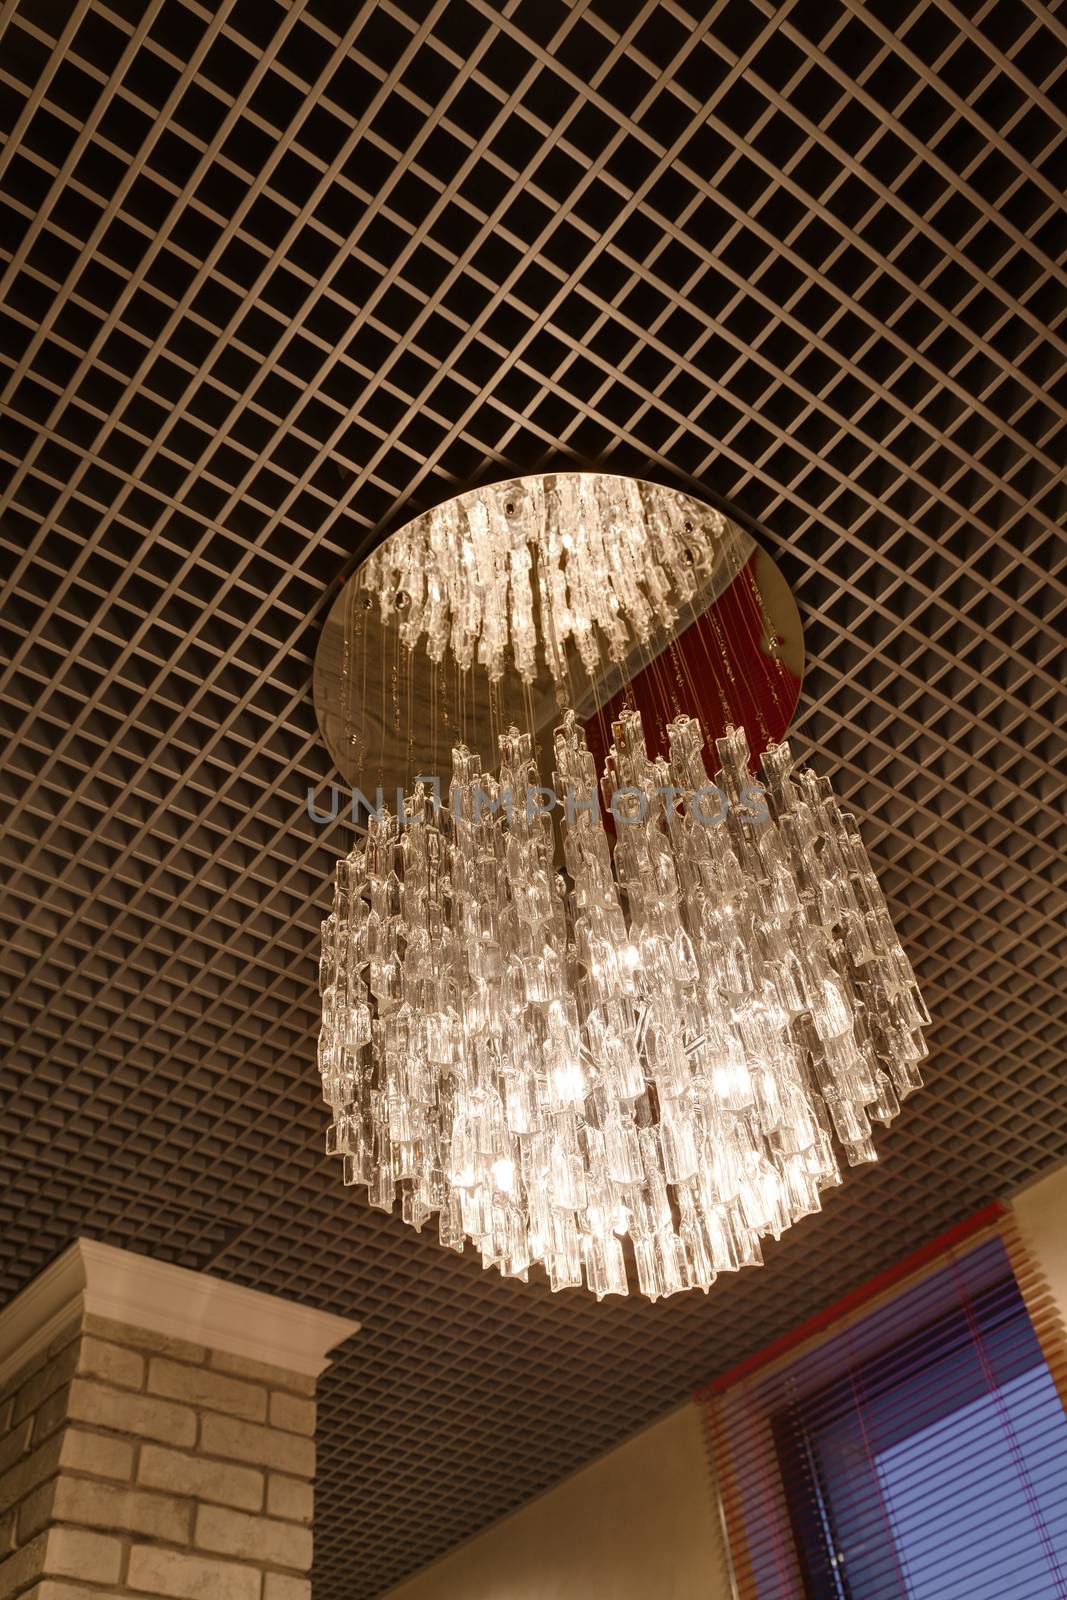 the magnificent crystal chandelier hanging on a ceiling